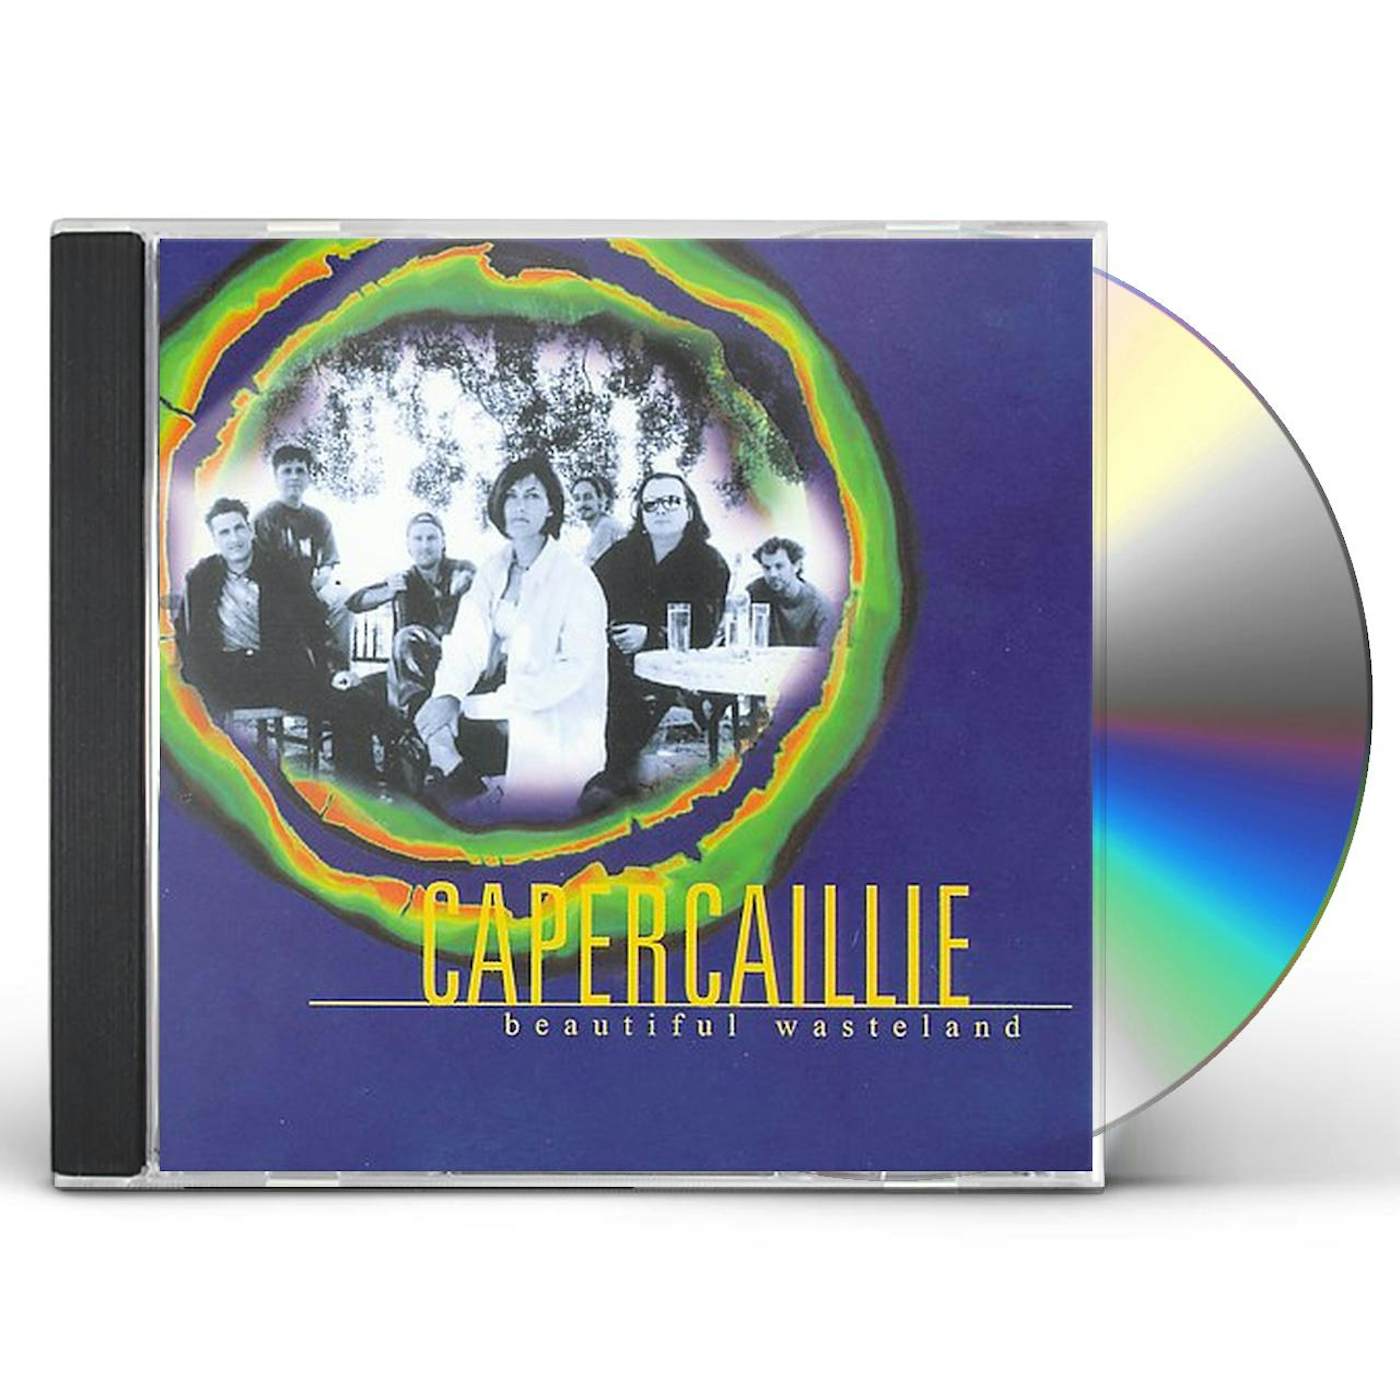 Capercaillie BEAUTIFUL WASTELAND CD